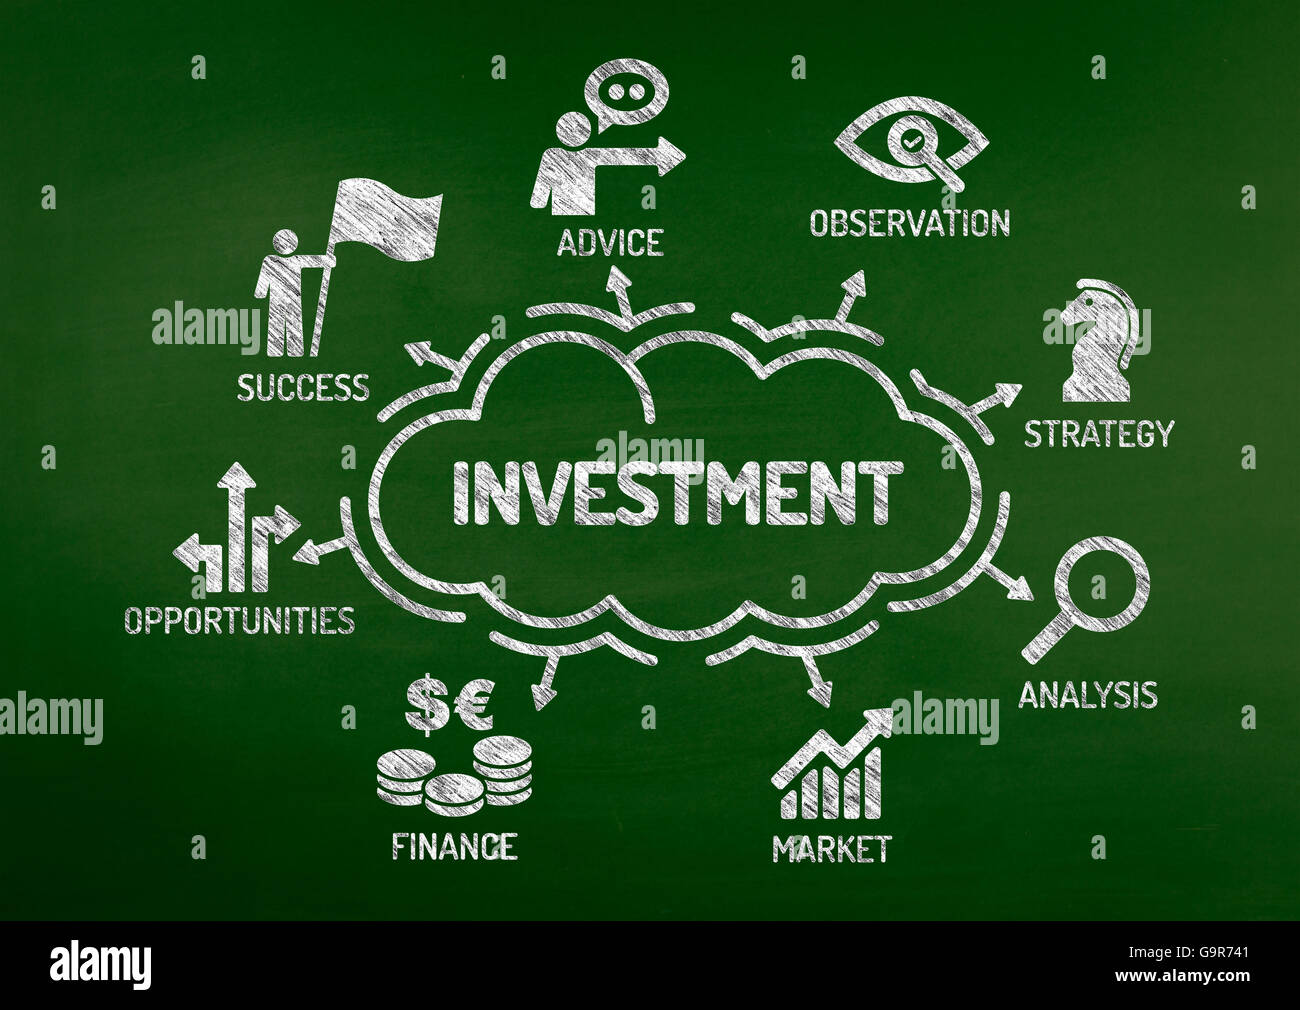 Investment Chart with keywords and icons on blackboard Stock Photo